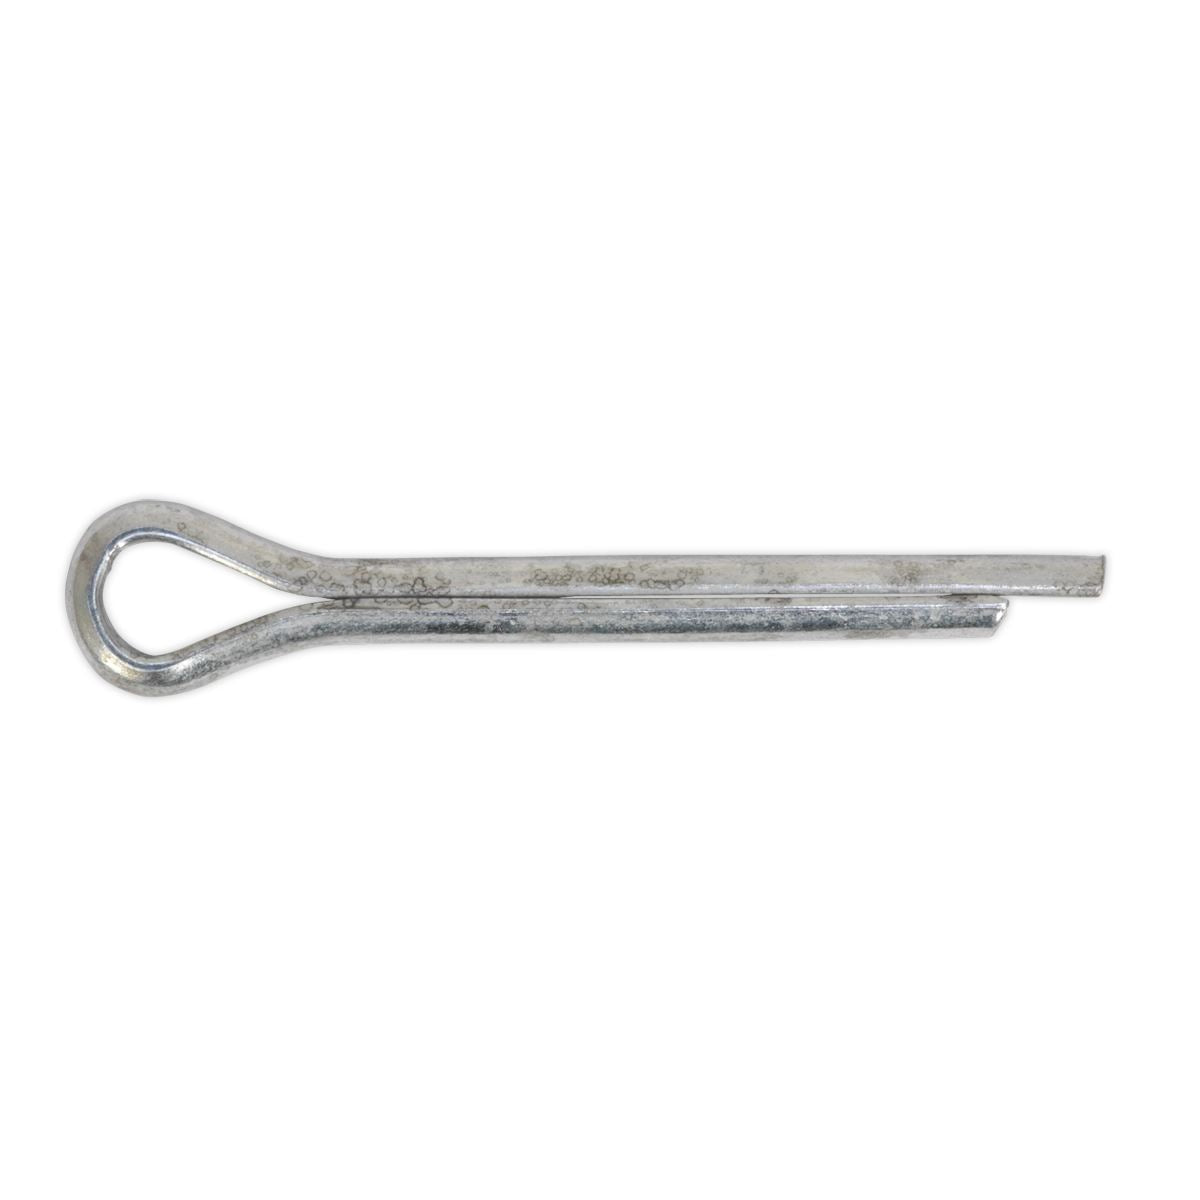 Sealey Split Pin 4 x 41mm Pack of 100